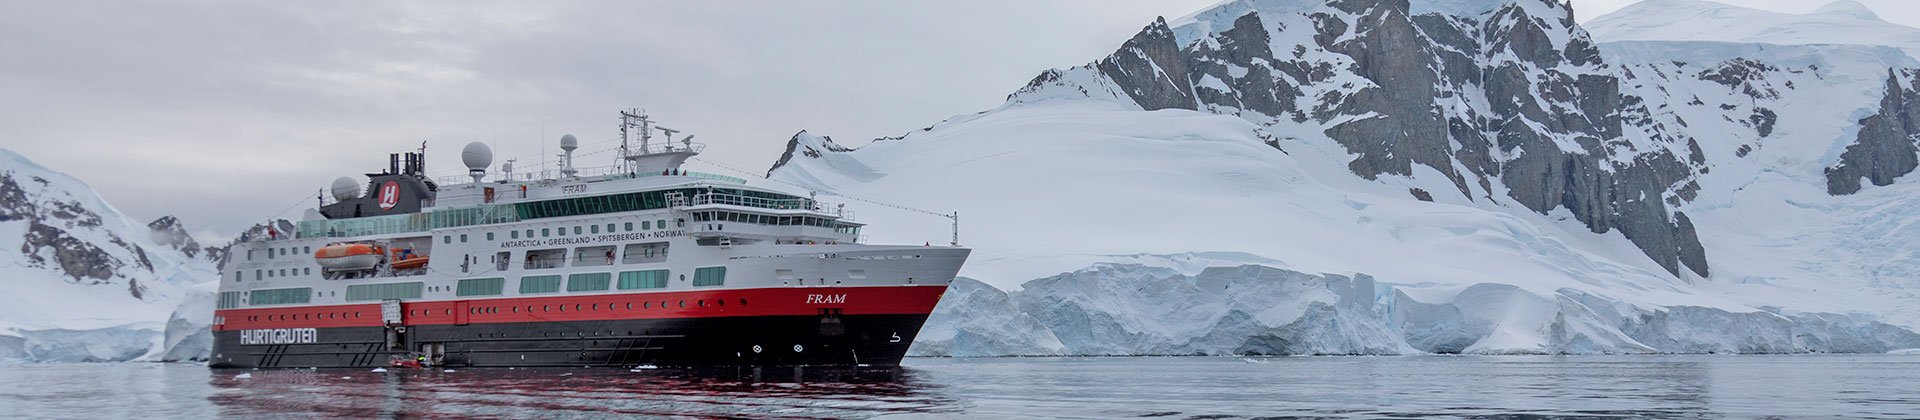 Ultimate Expedition to Antarctica by Hurtigruten